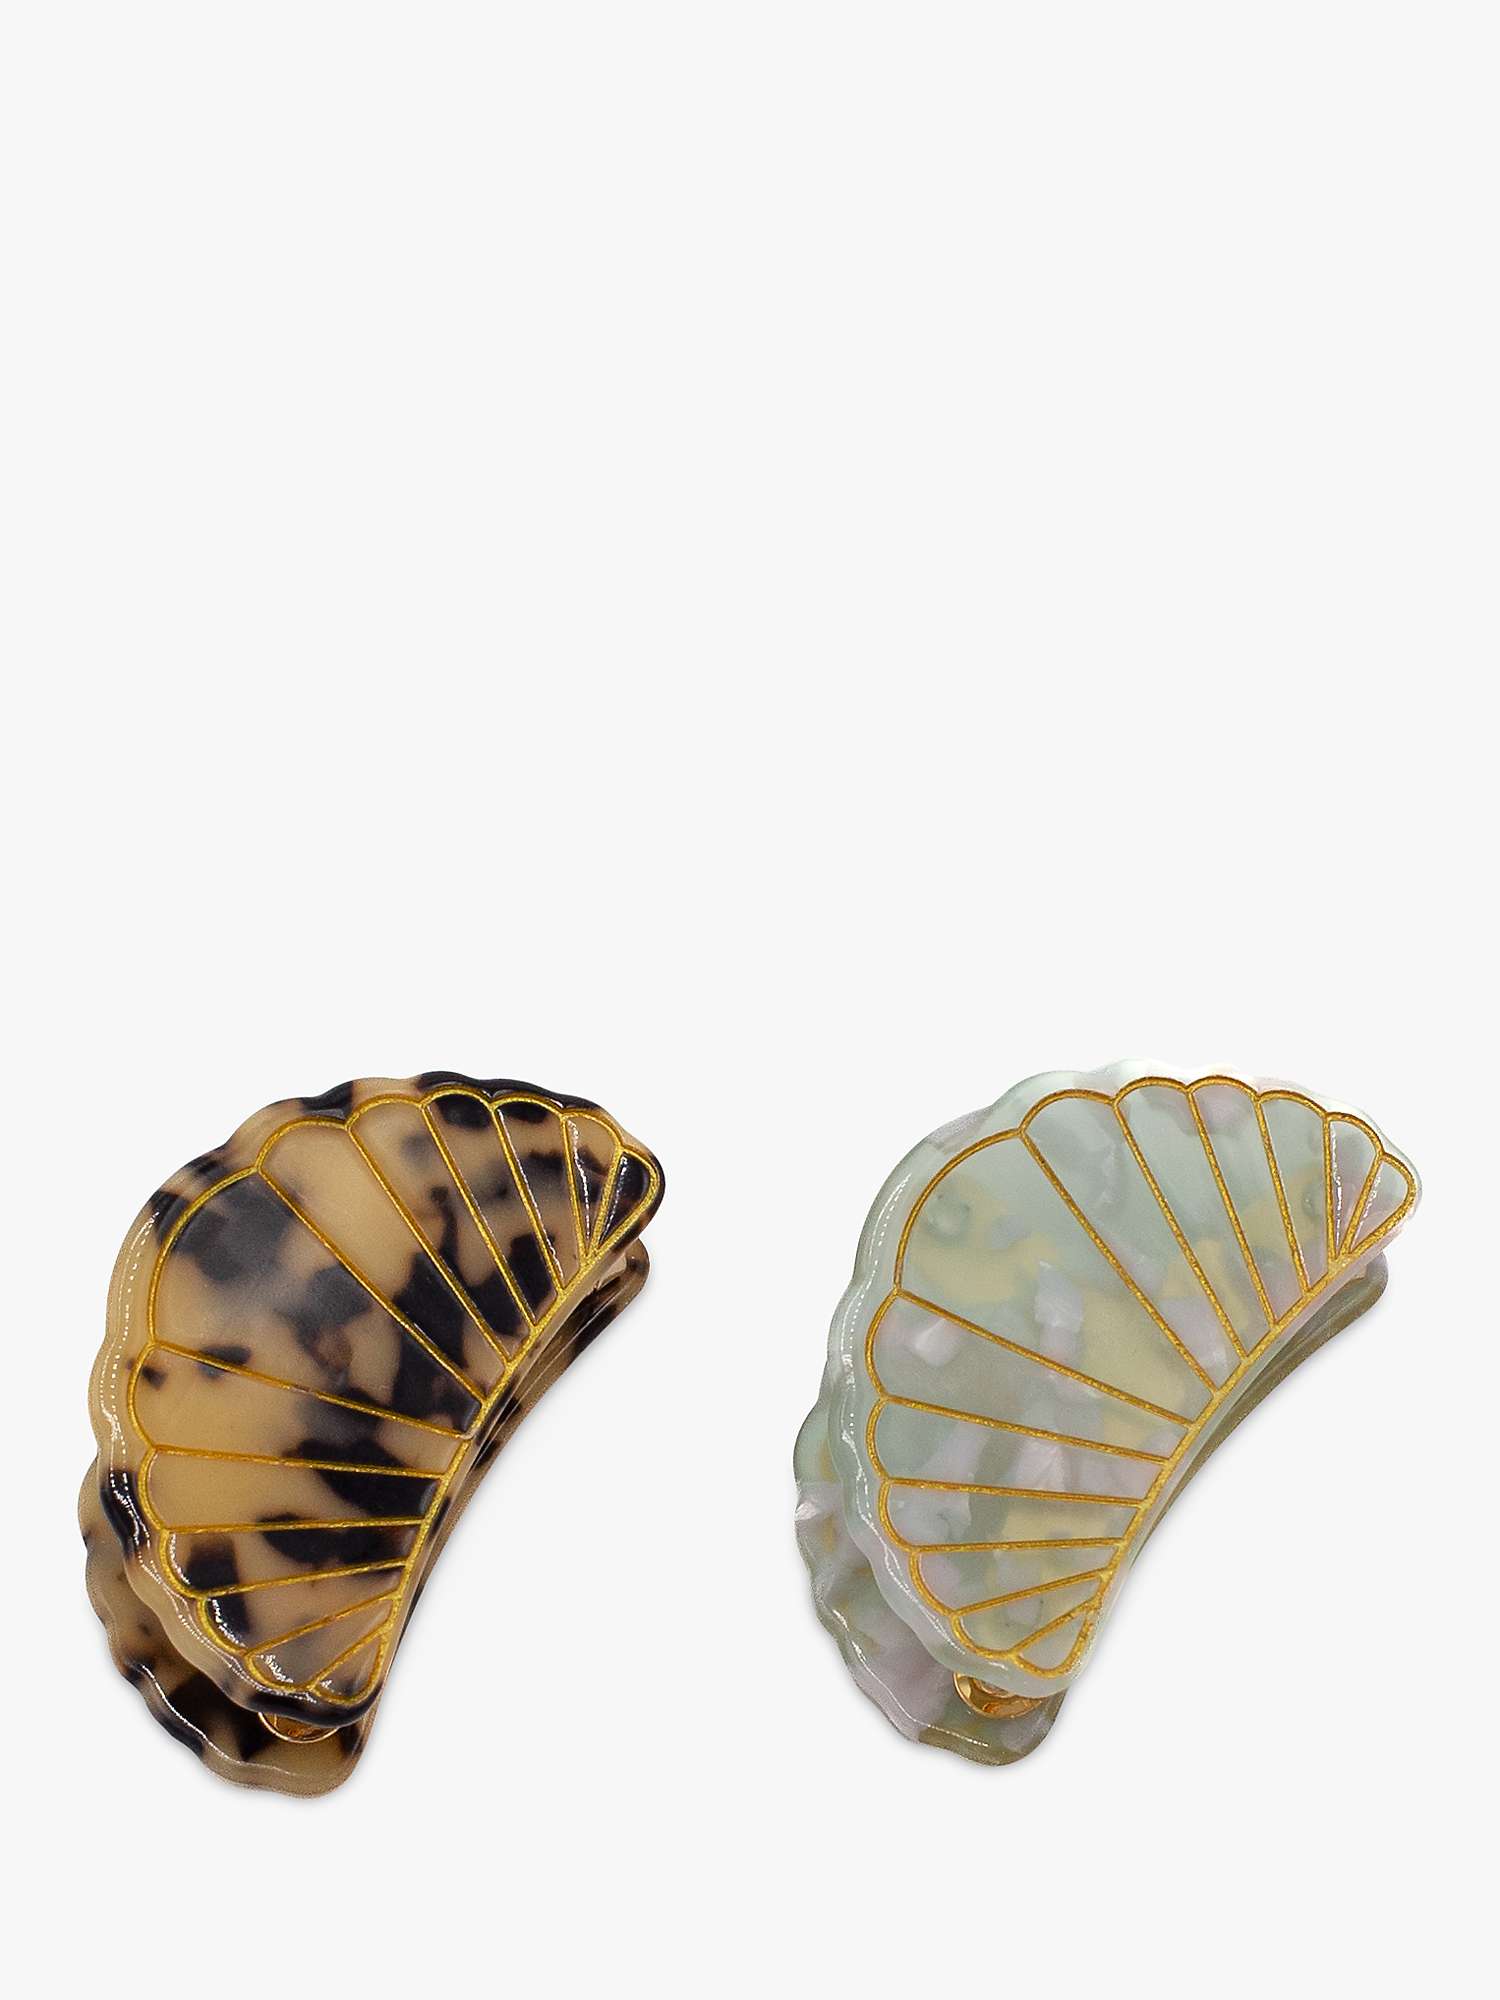 Buy Bloom & Bay Marina Mini Hair Claws, Pack of 2 Online at johnlewis.com